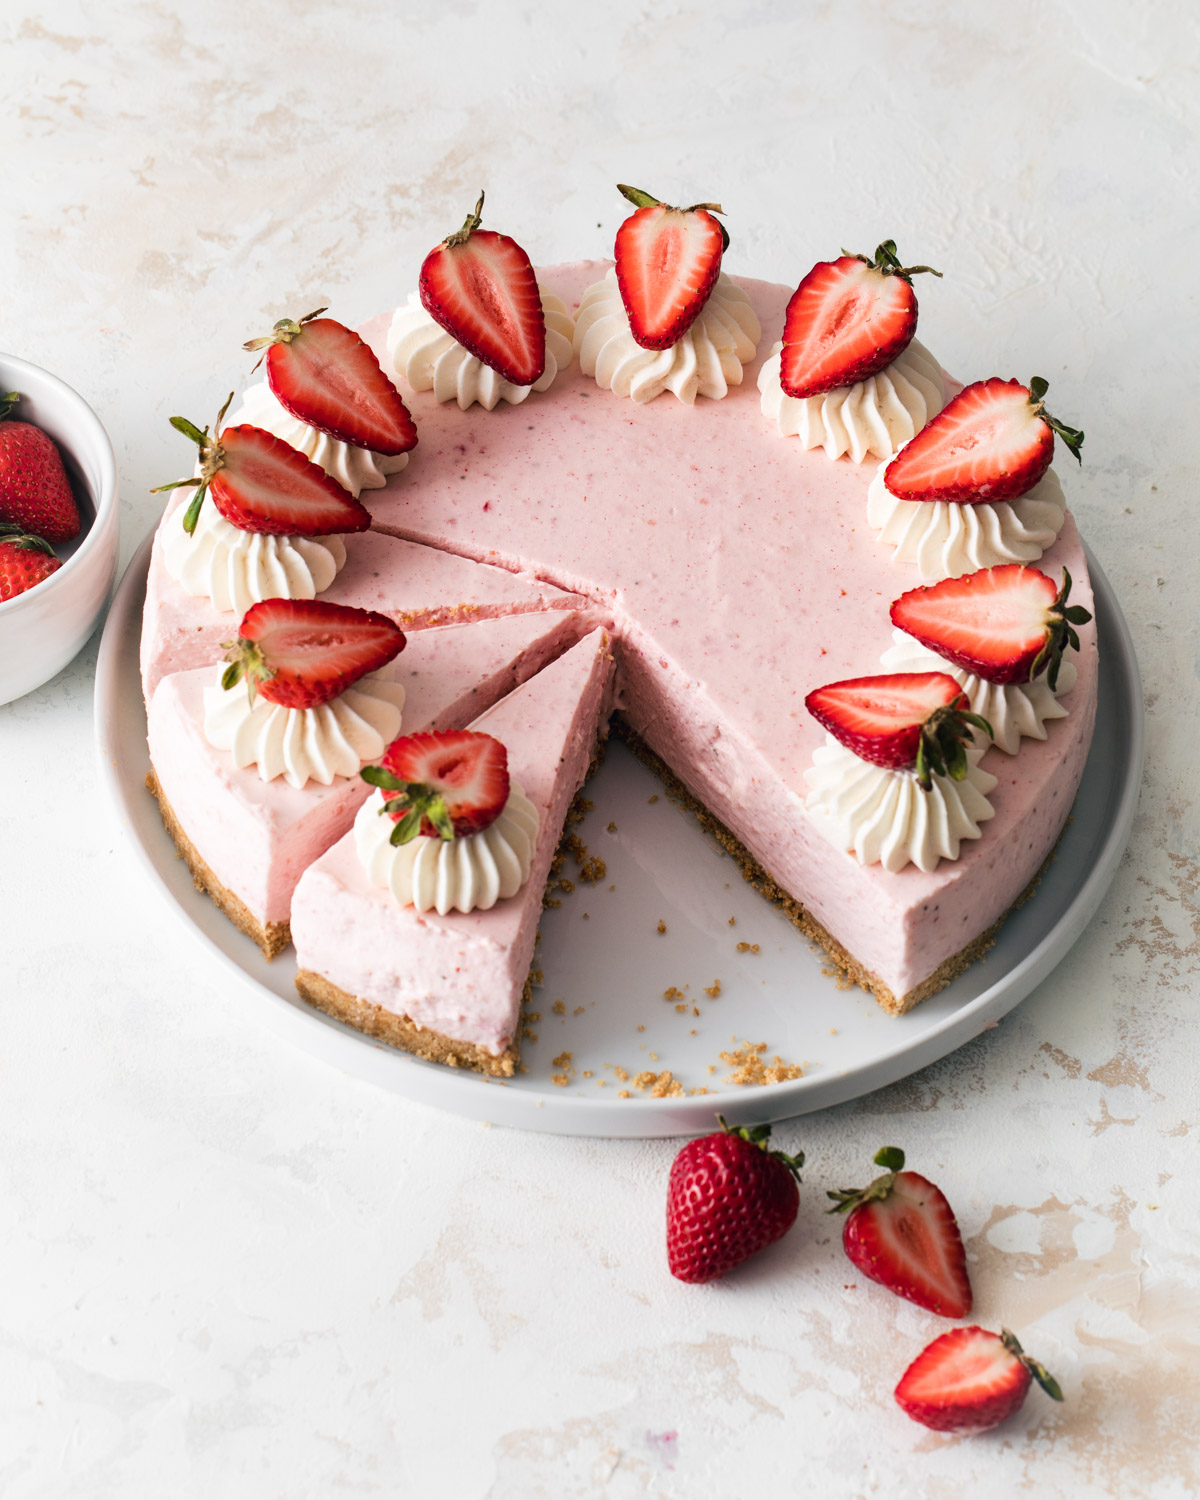 A no-bake strawberry cheesecake on a platter with fresh strawberries on top